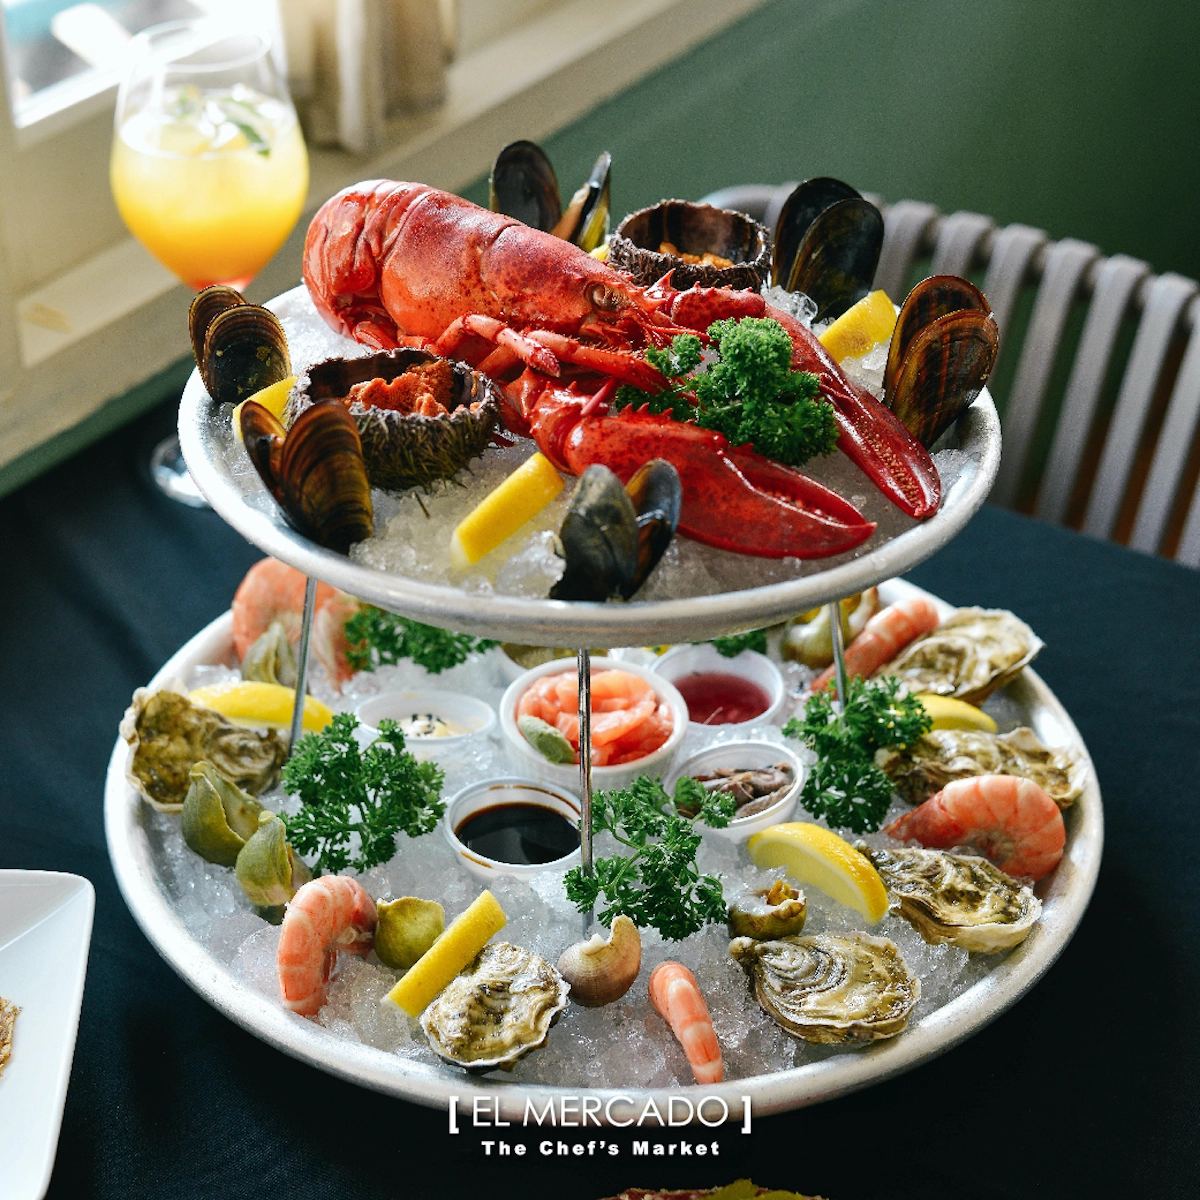 A giant seafood platter with lobster and seafood products at El Mercado, a gourmet restaurant in Bangkok